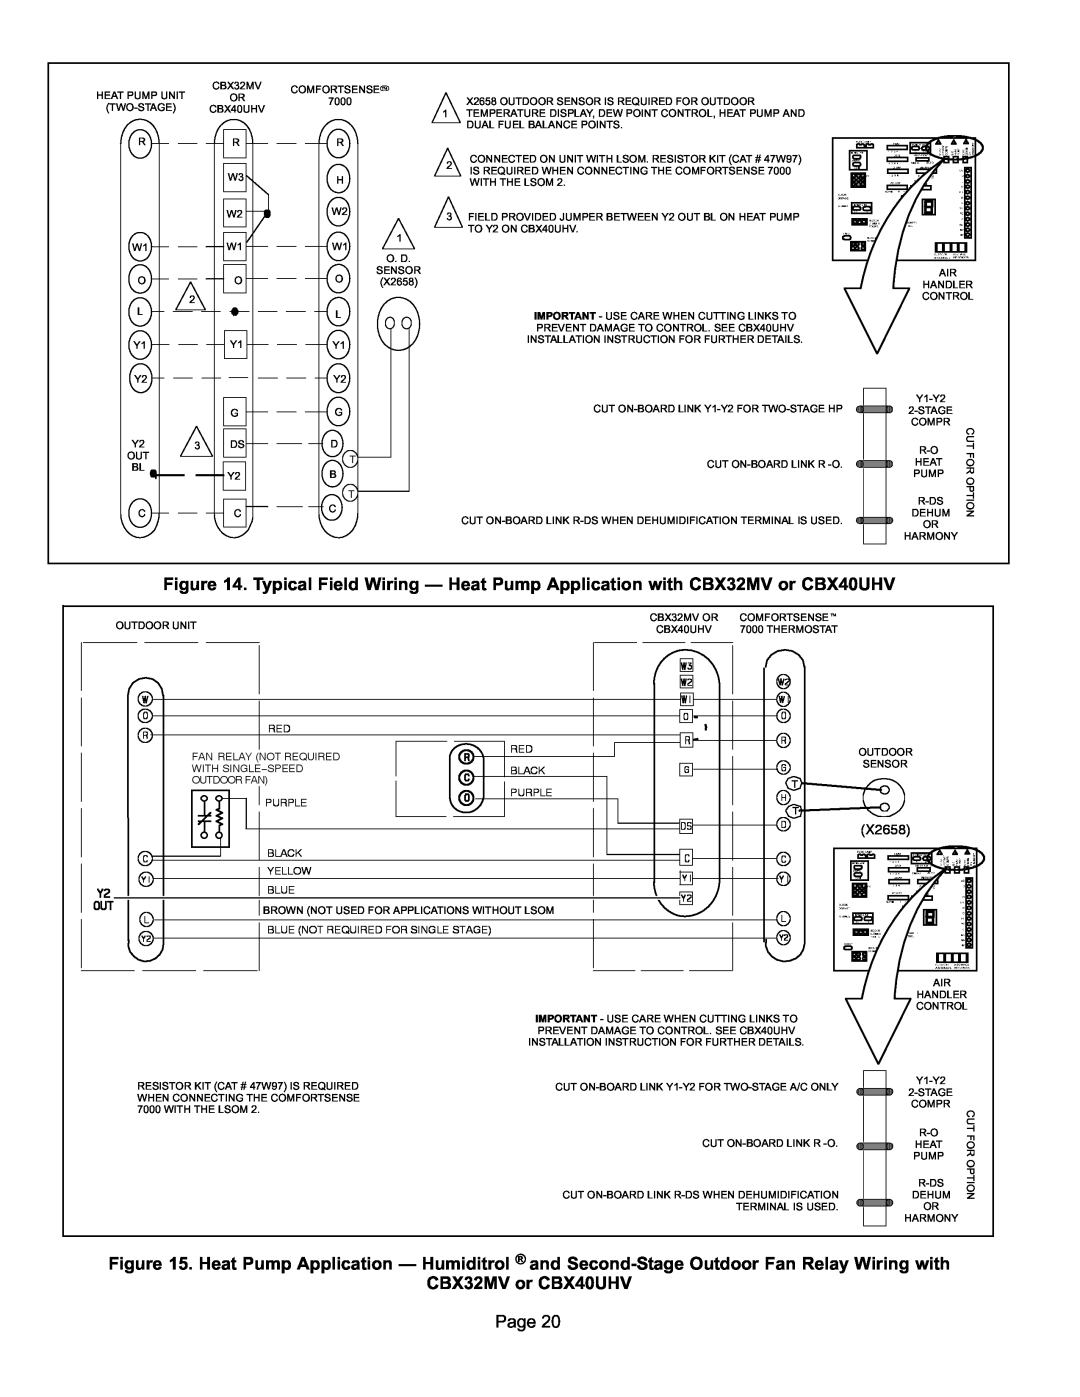 Lenox P506640-01 Typical Field Wiring, Heat Pump Application, and Second−Stage Outdoor Fan Relay Wiring with, Page, X2658 